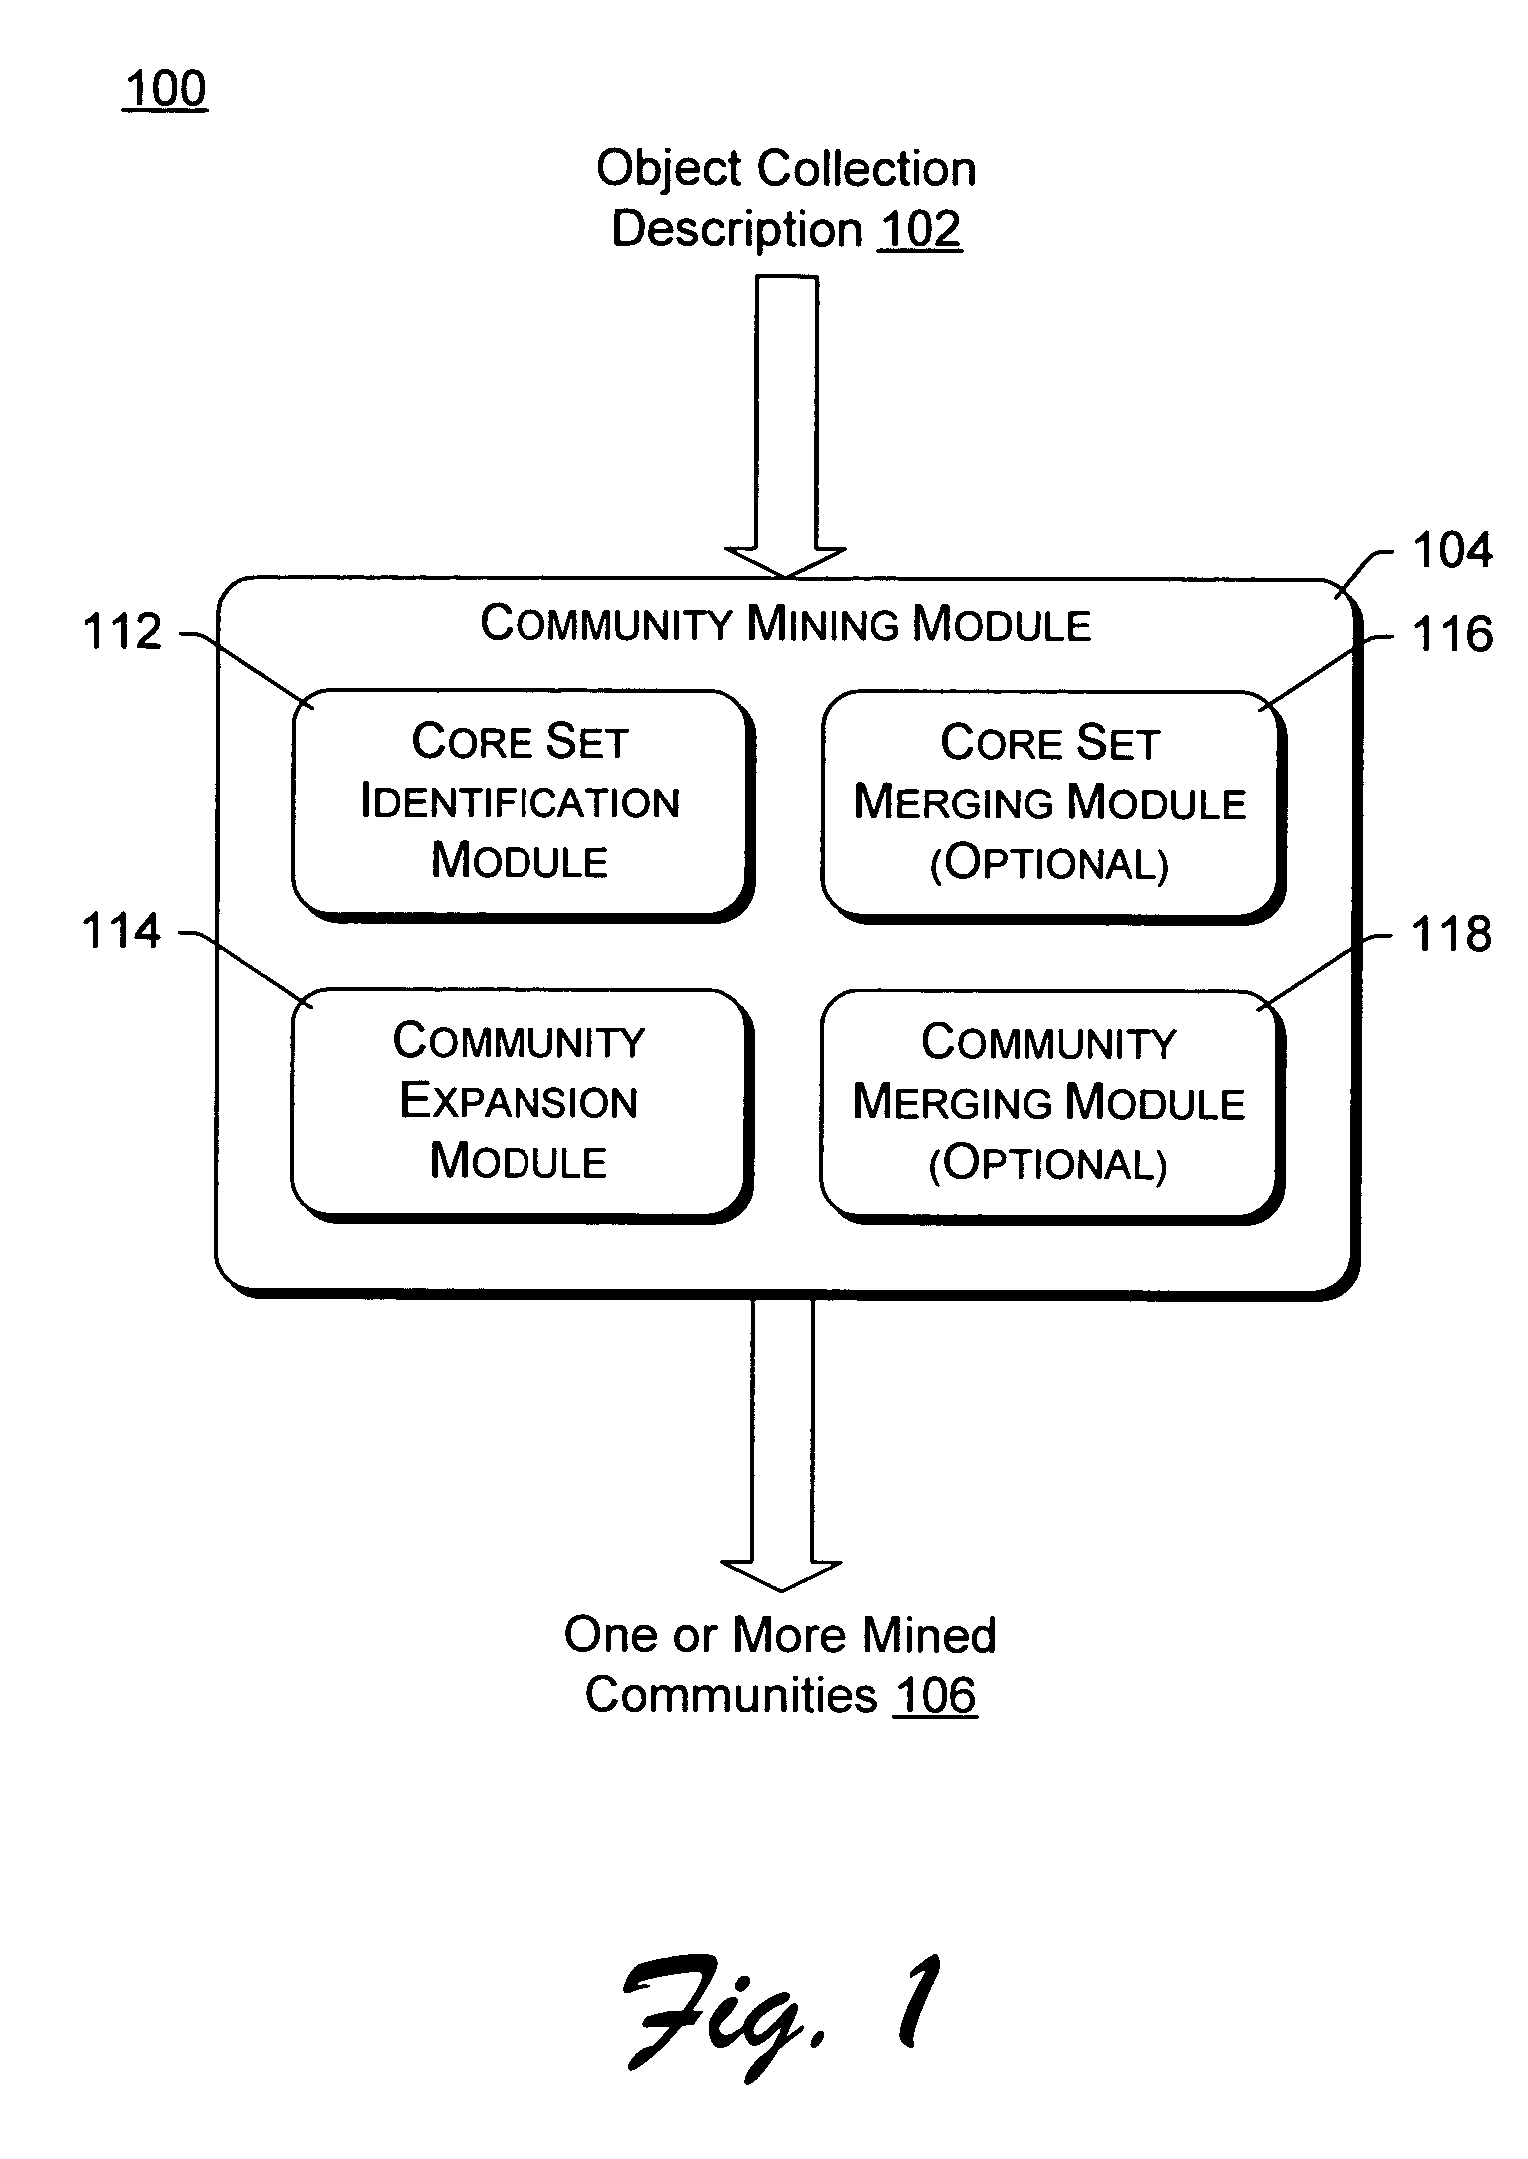 Community mining based on core objects and affiliated objects